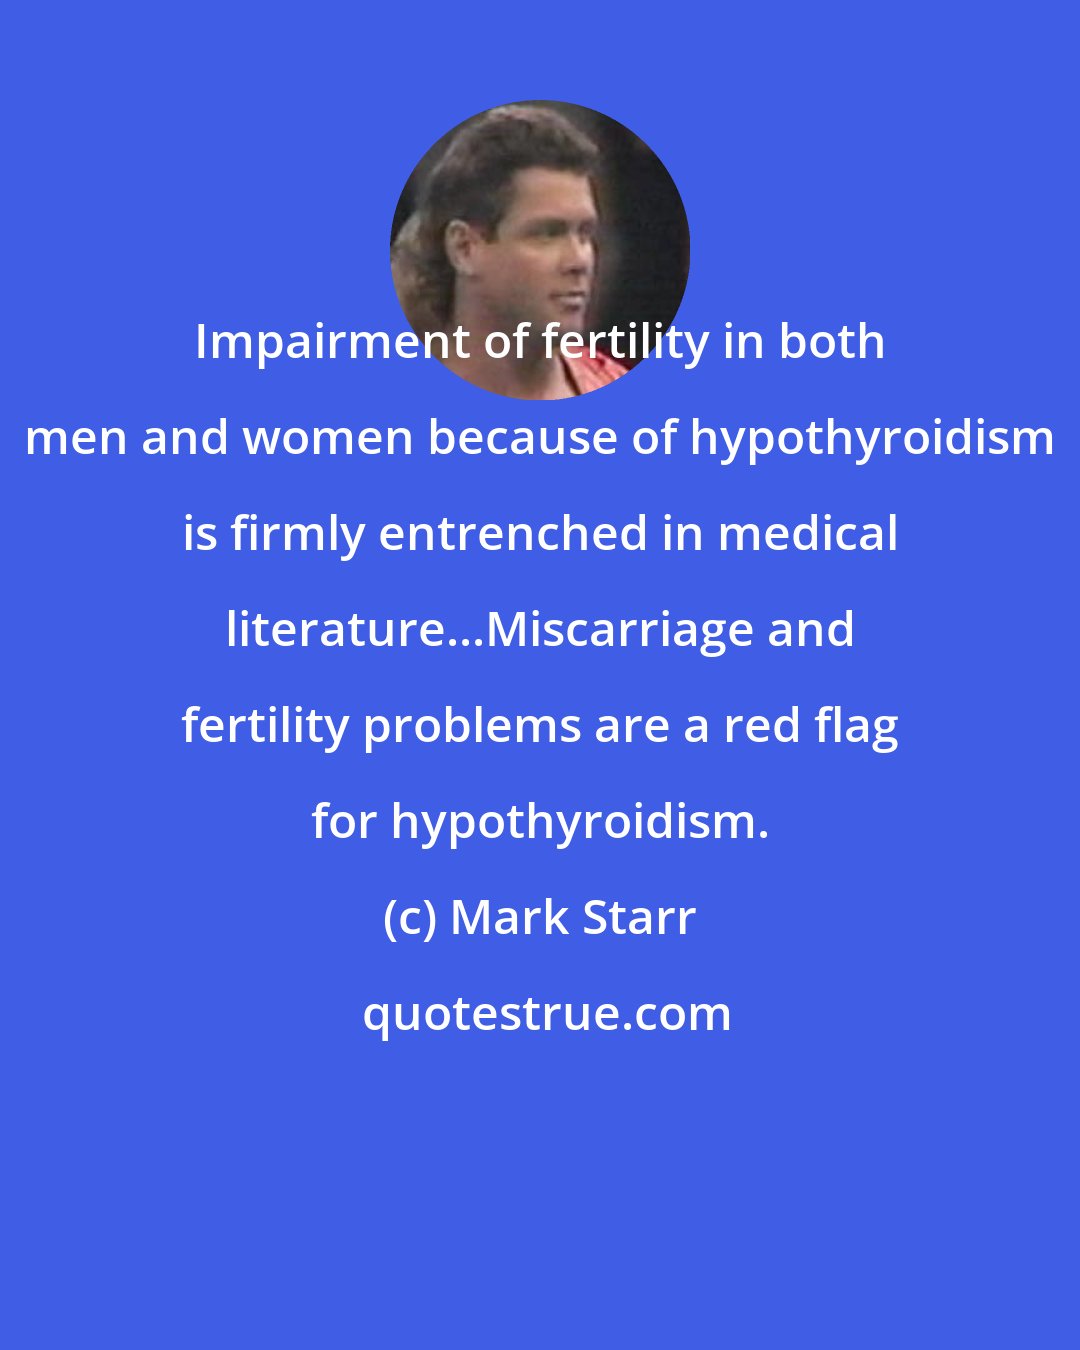 Mark Starr: Impairment of fertility in both men and women because of hypothyroidism is firmly entrenched in medical literature...Miscarriage and fertility problems are a red flag for hypothyroidism.